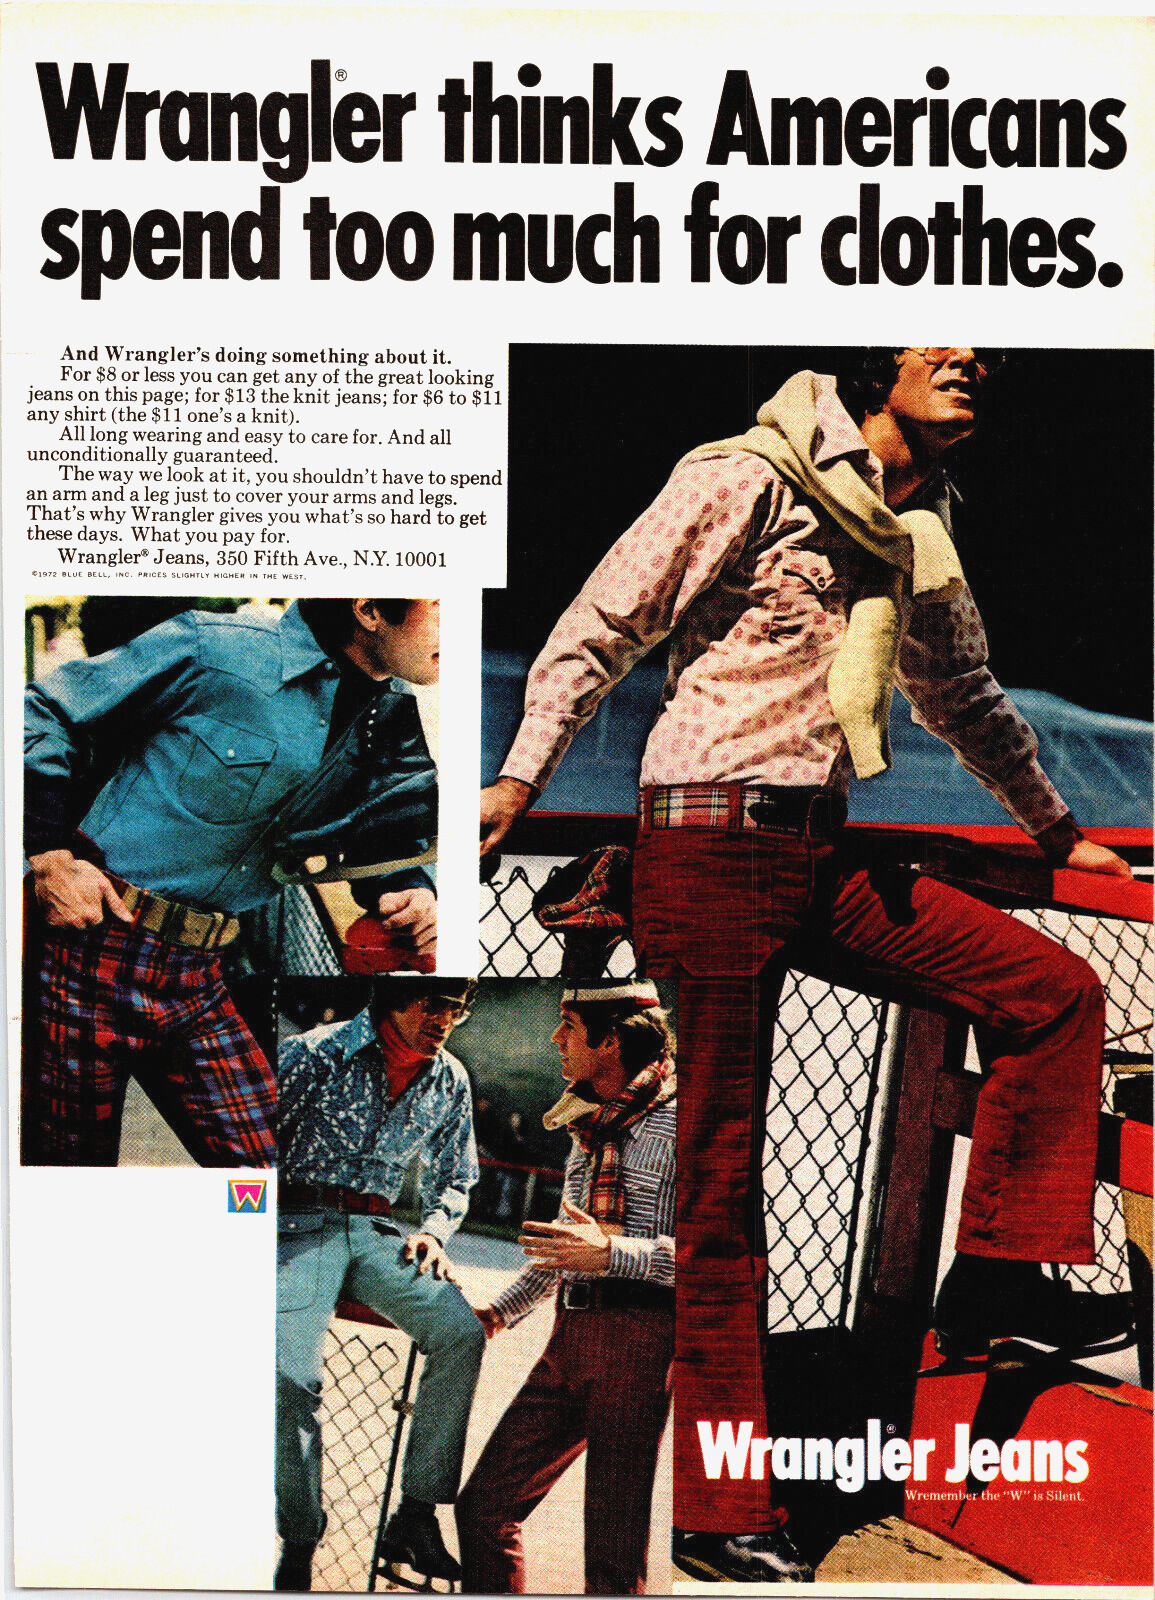 Vintage 1972 Wrangler Thinks Americans Spend Too Much For Cloths Advertisement